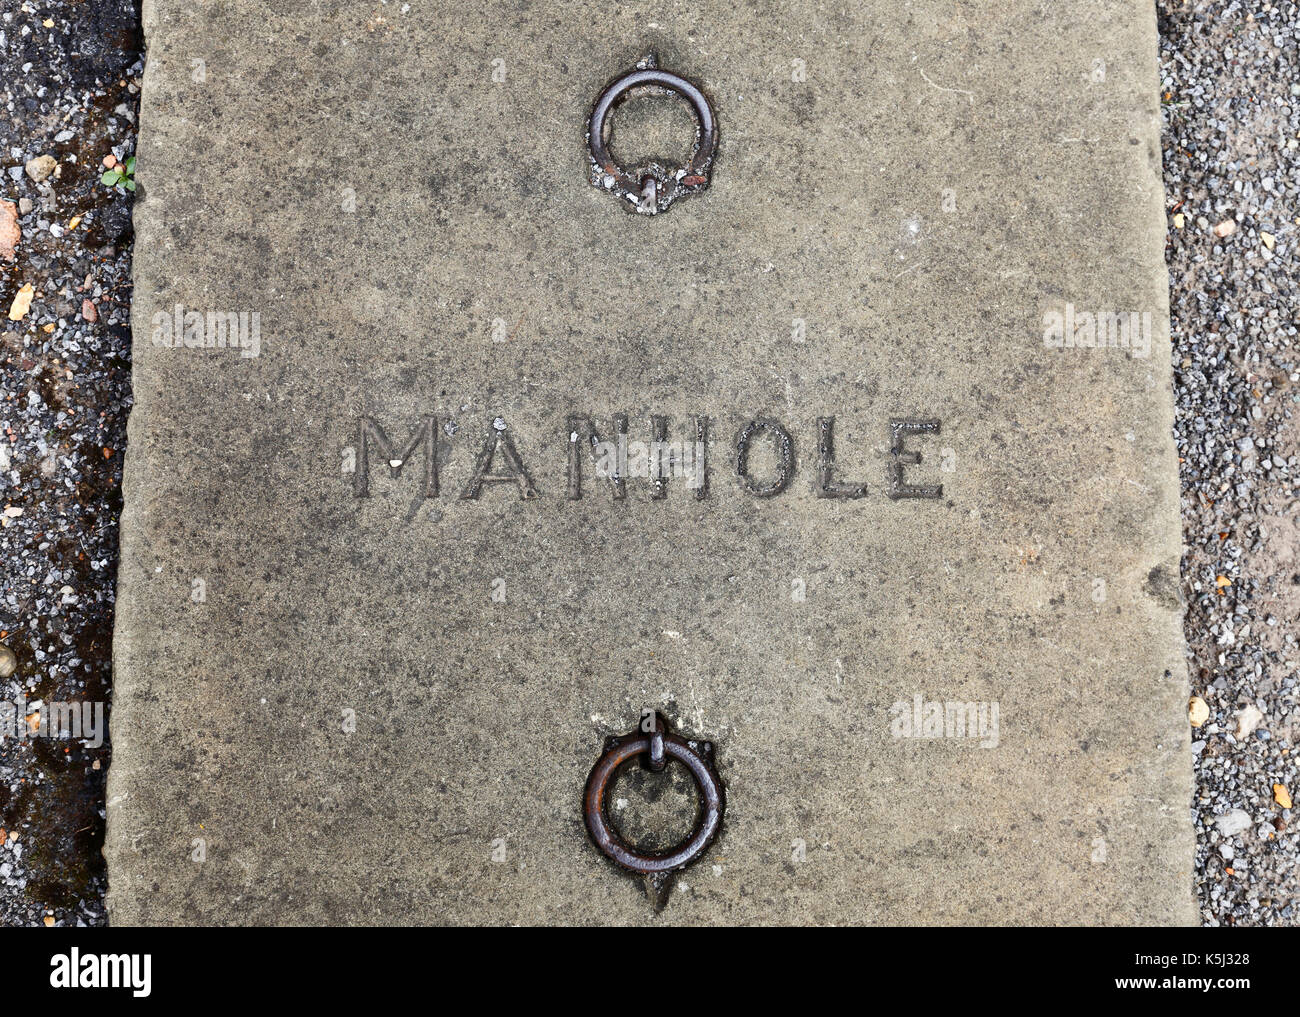 Concrete manhole cover with iron ring handles. Stock Photo